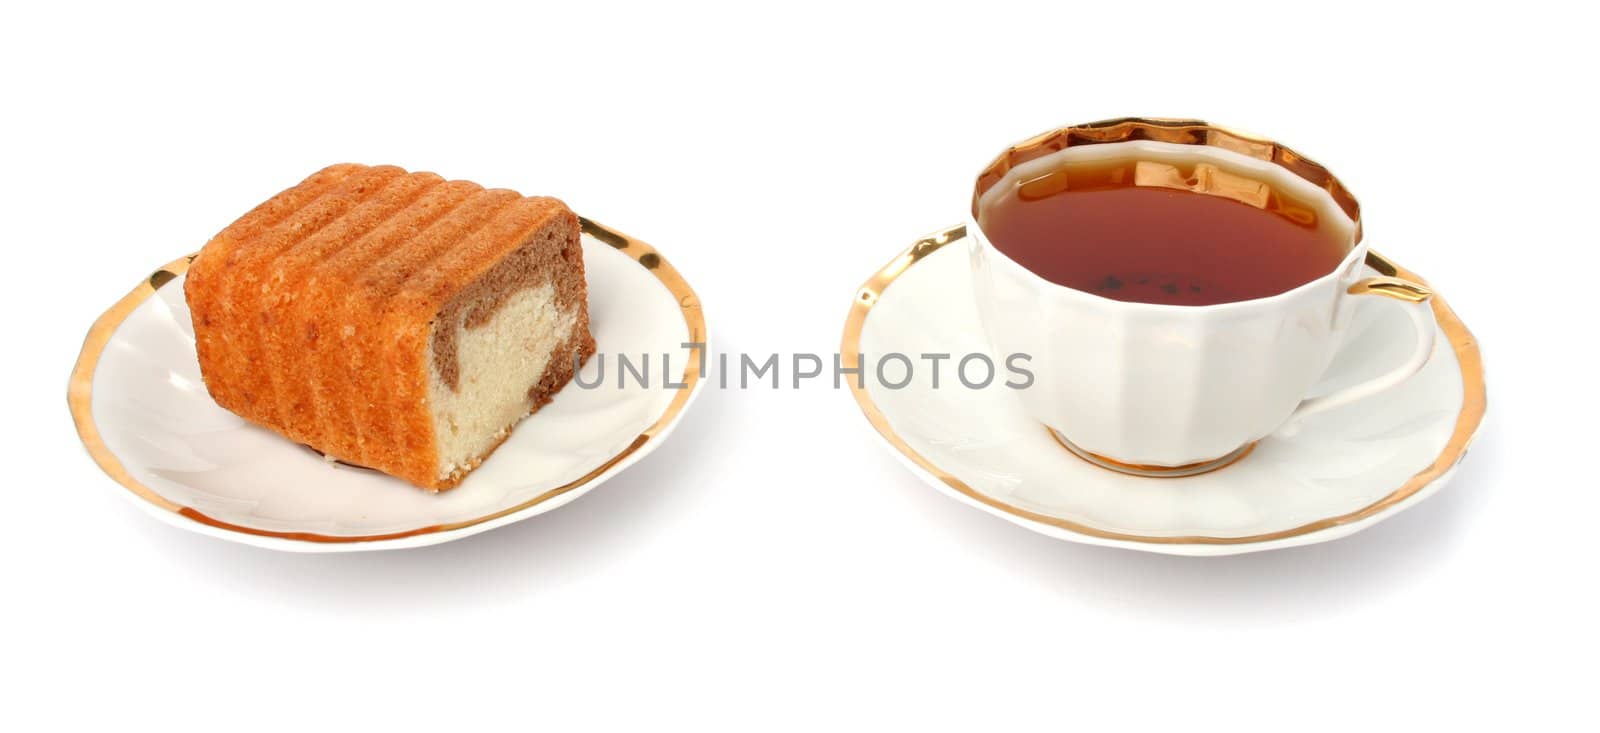 Sliced chocolate cake and cup of tea on a white background 